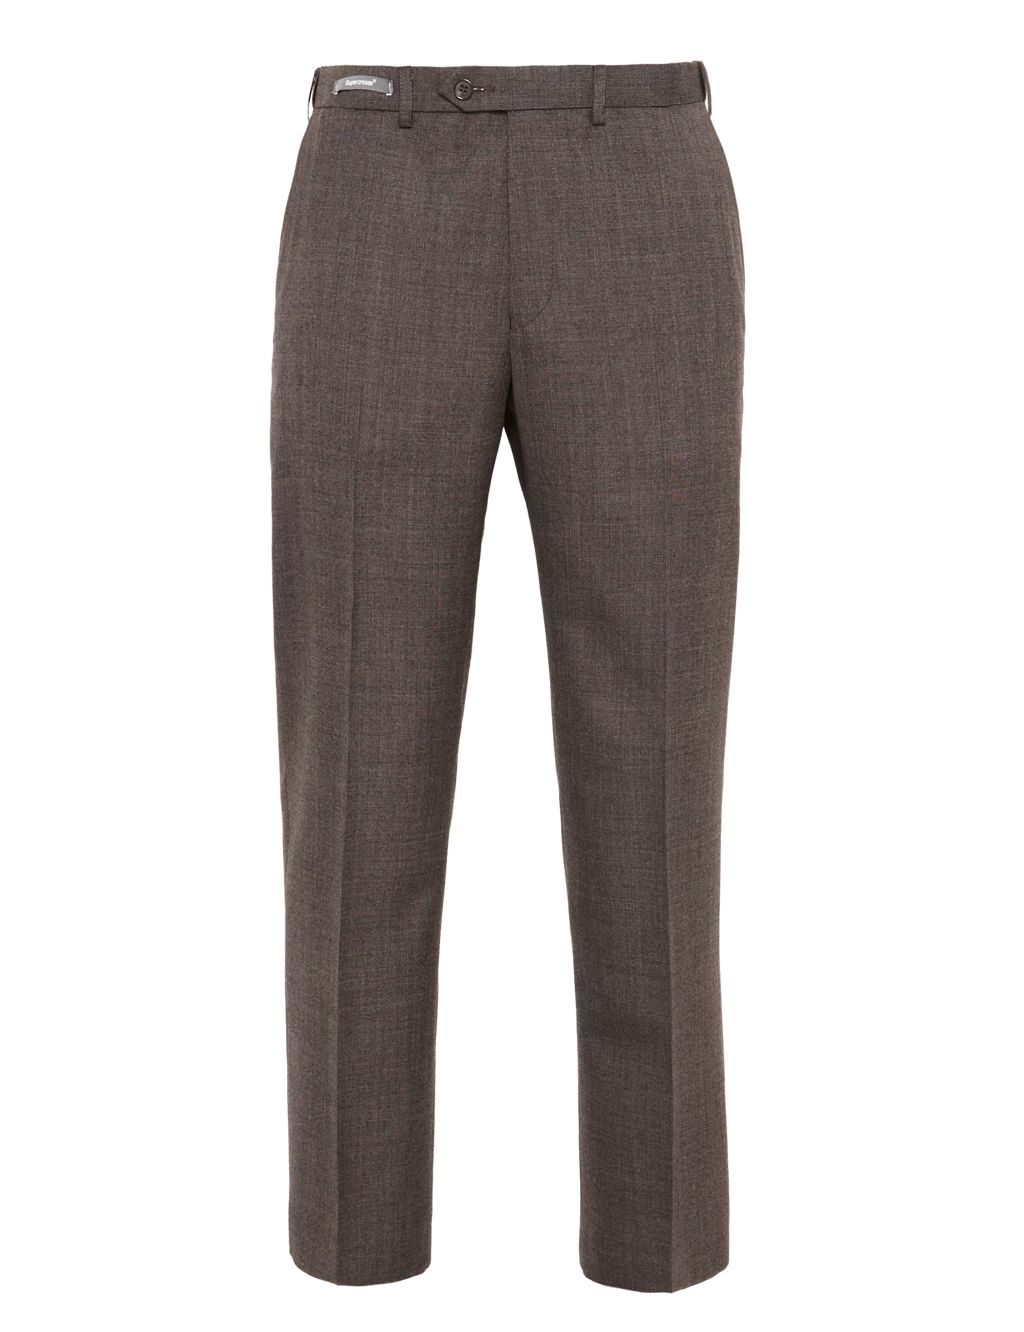 Supercrease® Active Waistband Flat Front Trousers with Wool 1 of 6